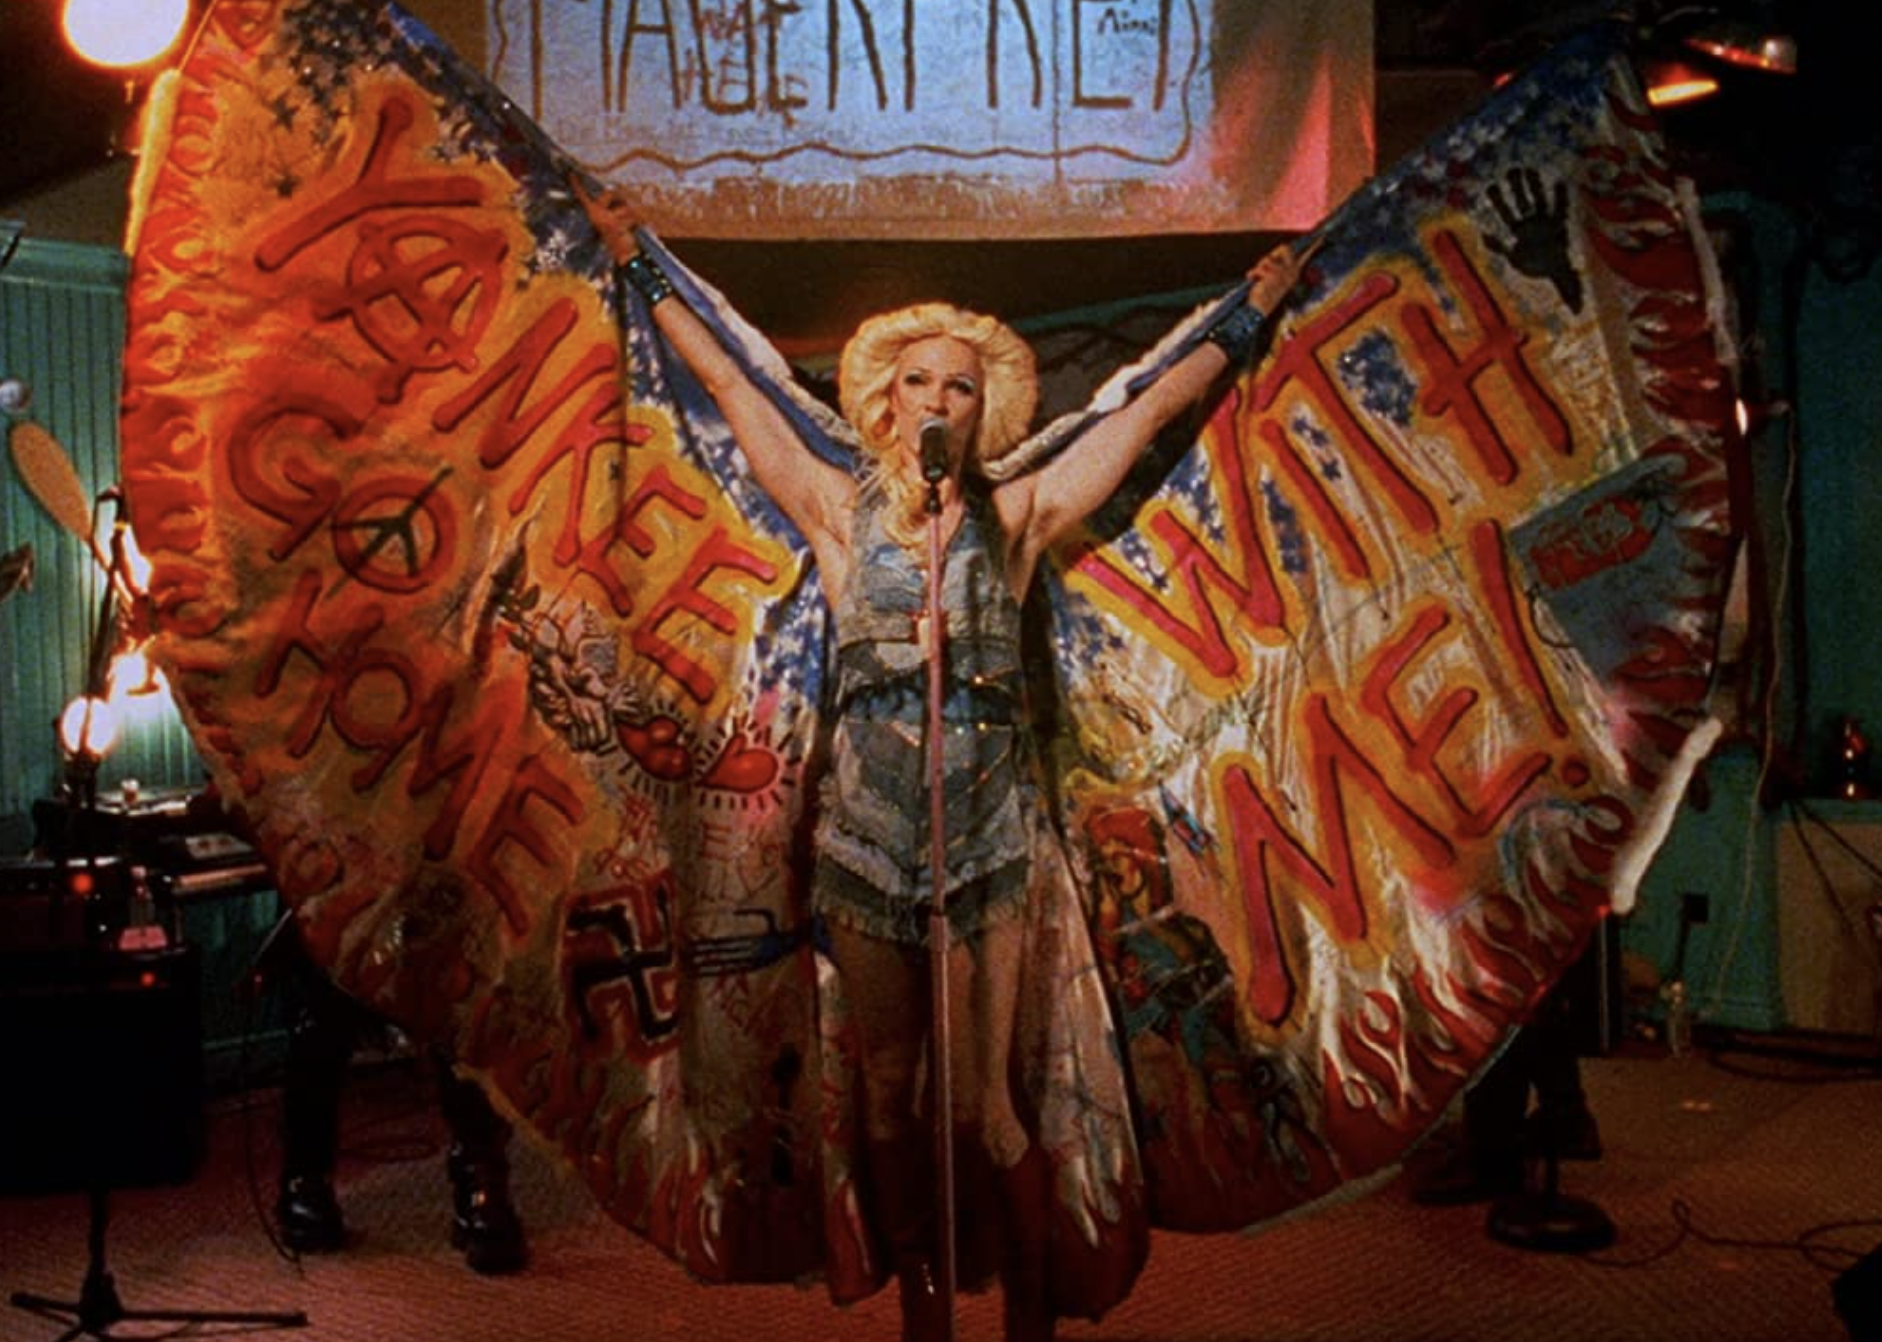 John Cameron Mitchell in "Hedwig and the Angry Inch".